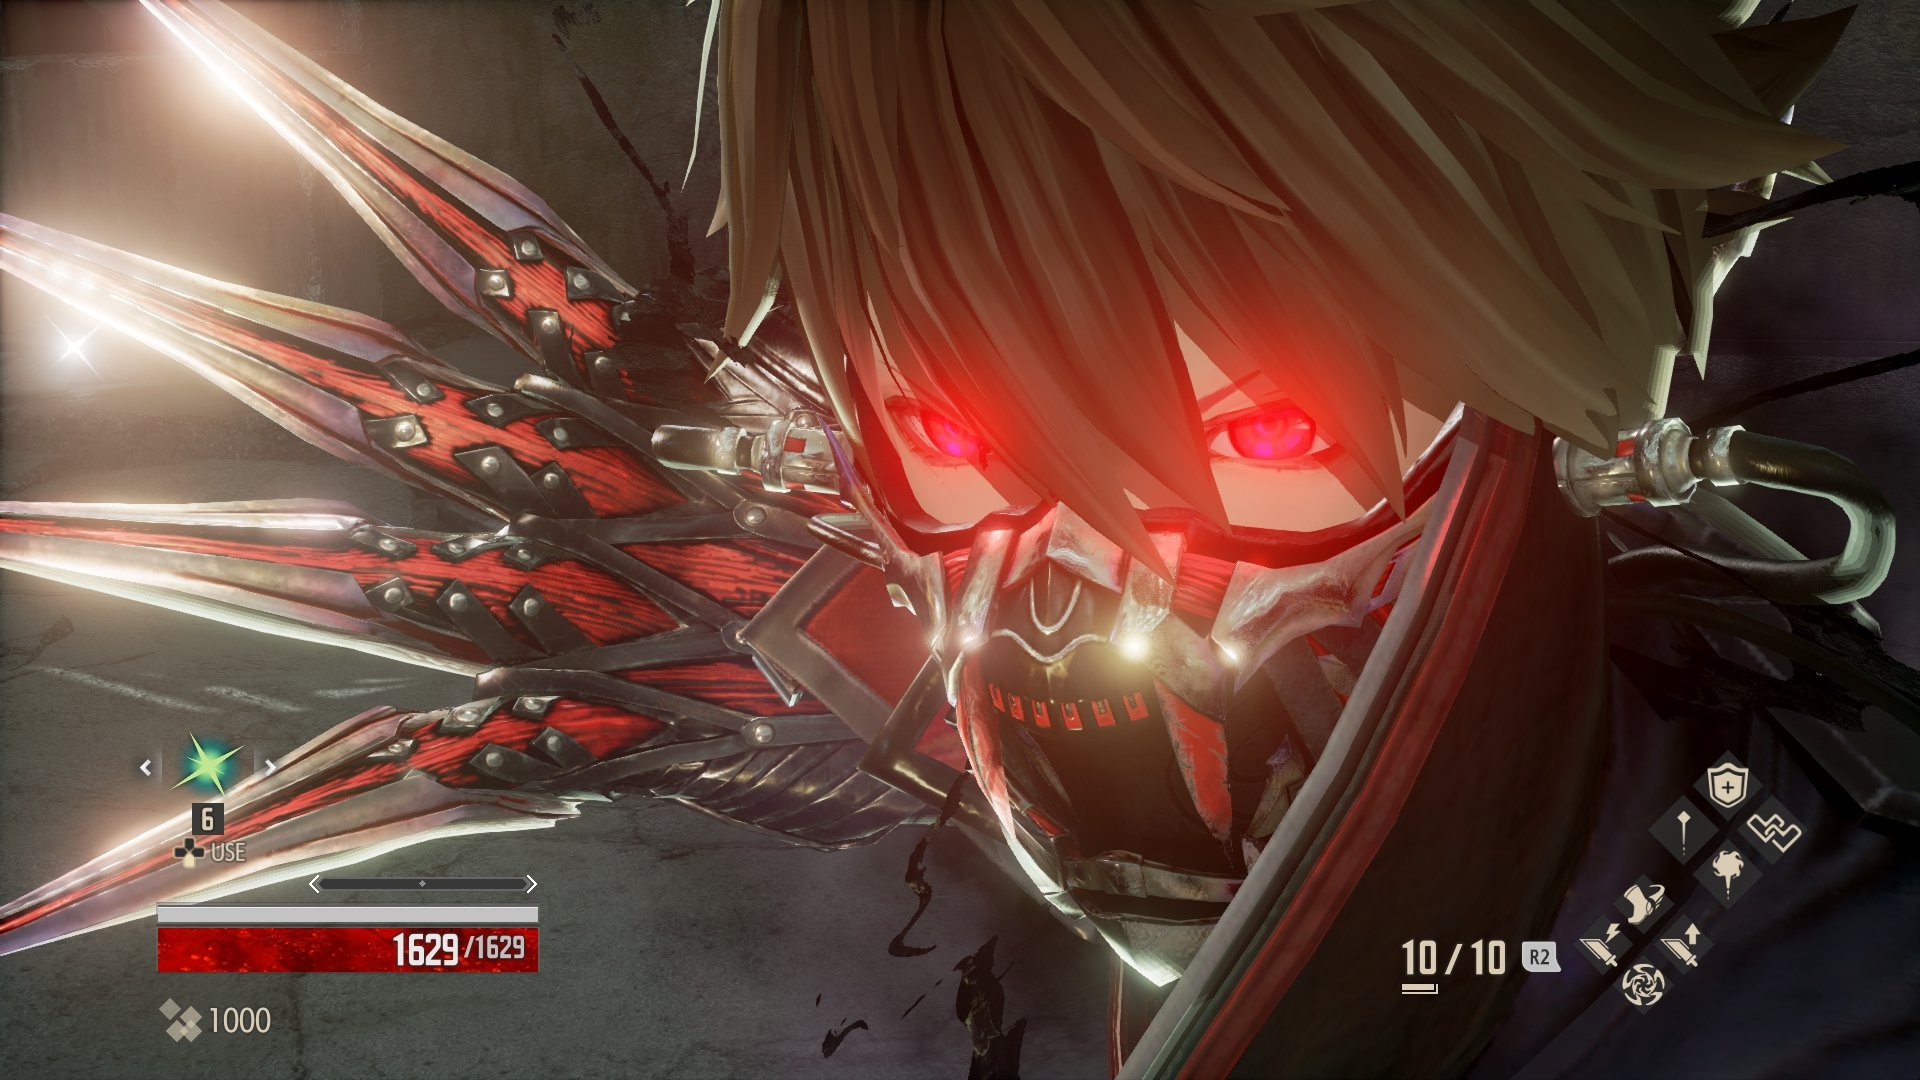 Code Vein Gameplay: 10 Minutes of Demon Battling and Brief Boss Encounters